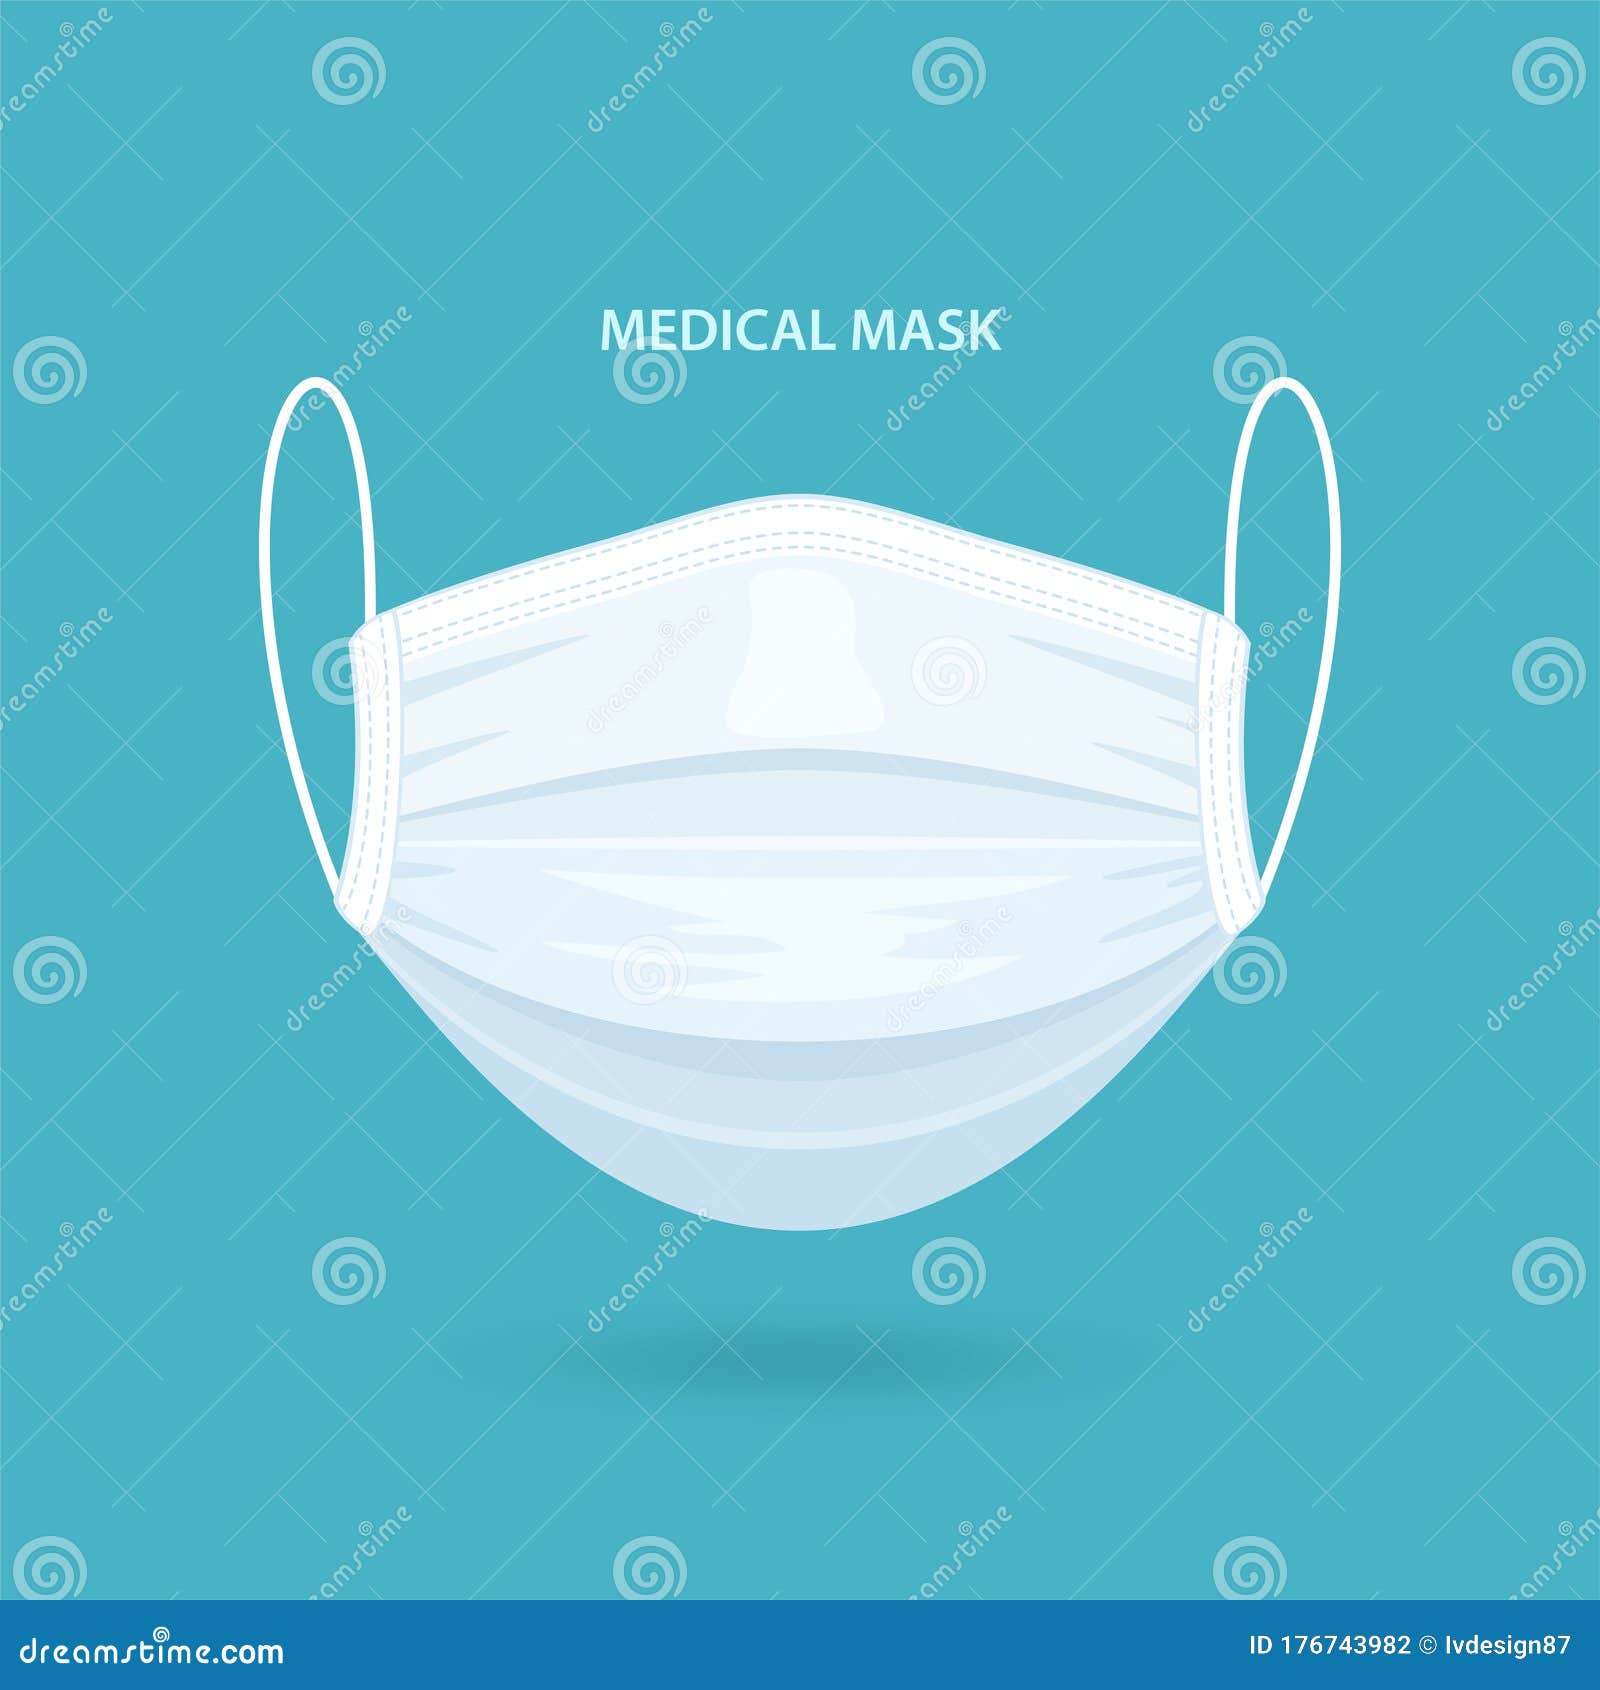 medical or surgical face mask. virus protection. breathing respirator mask. health care concept. 